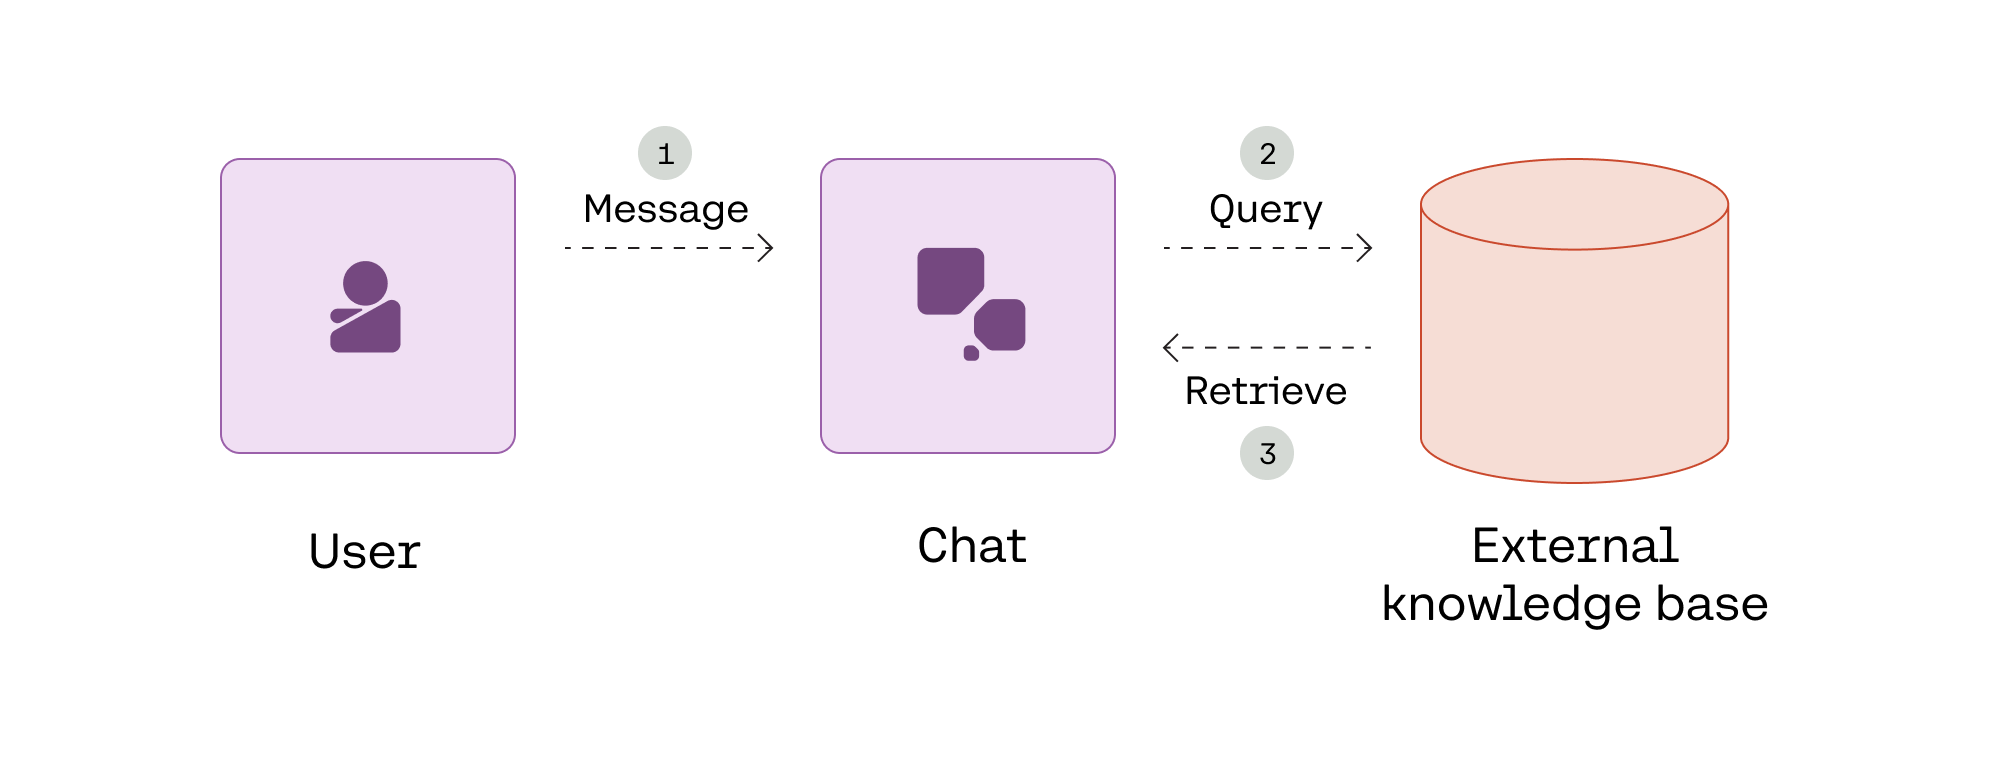 The retrieval part of RAG: Given a user message, the endpoint retrieves information from an external knowledge base